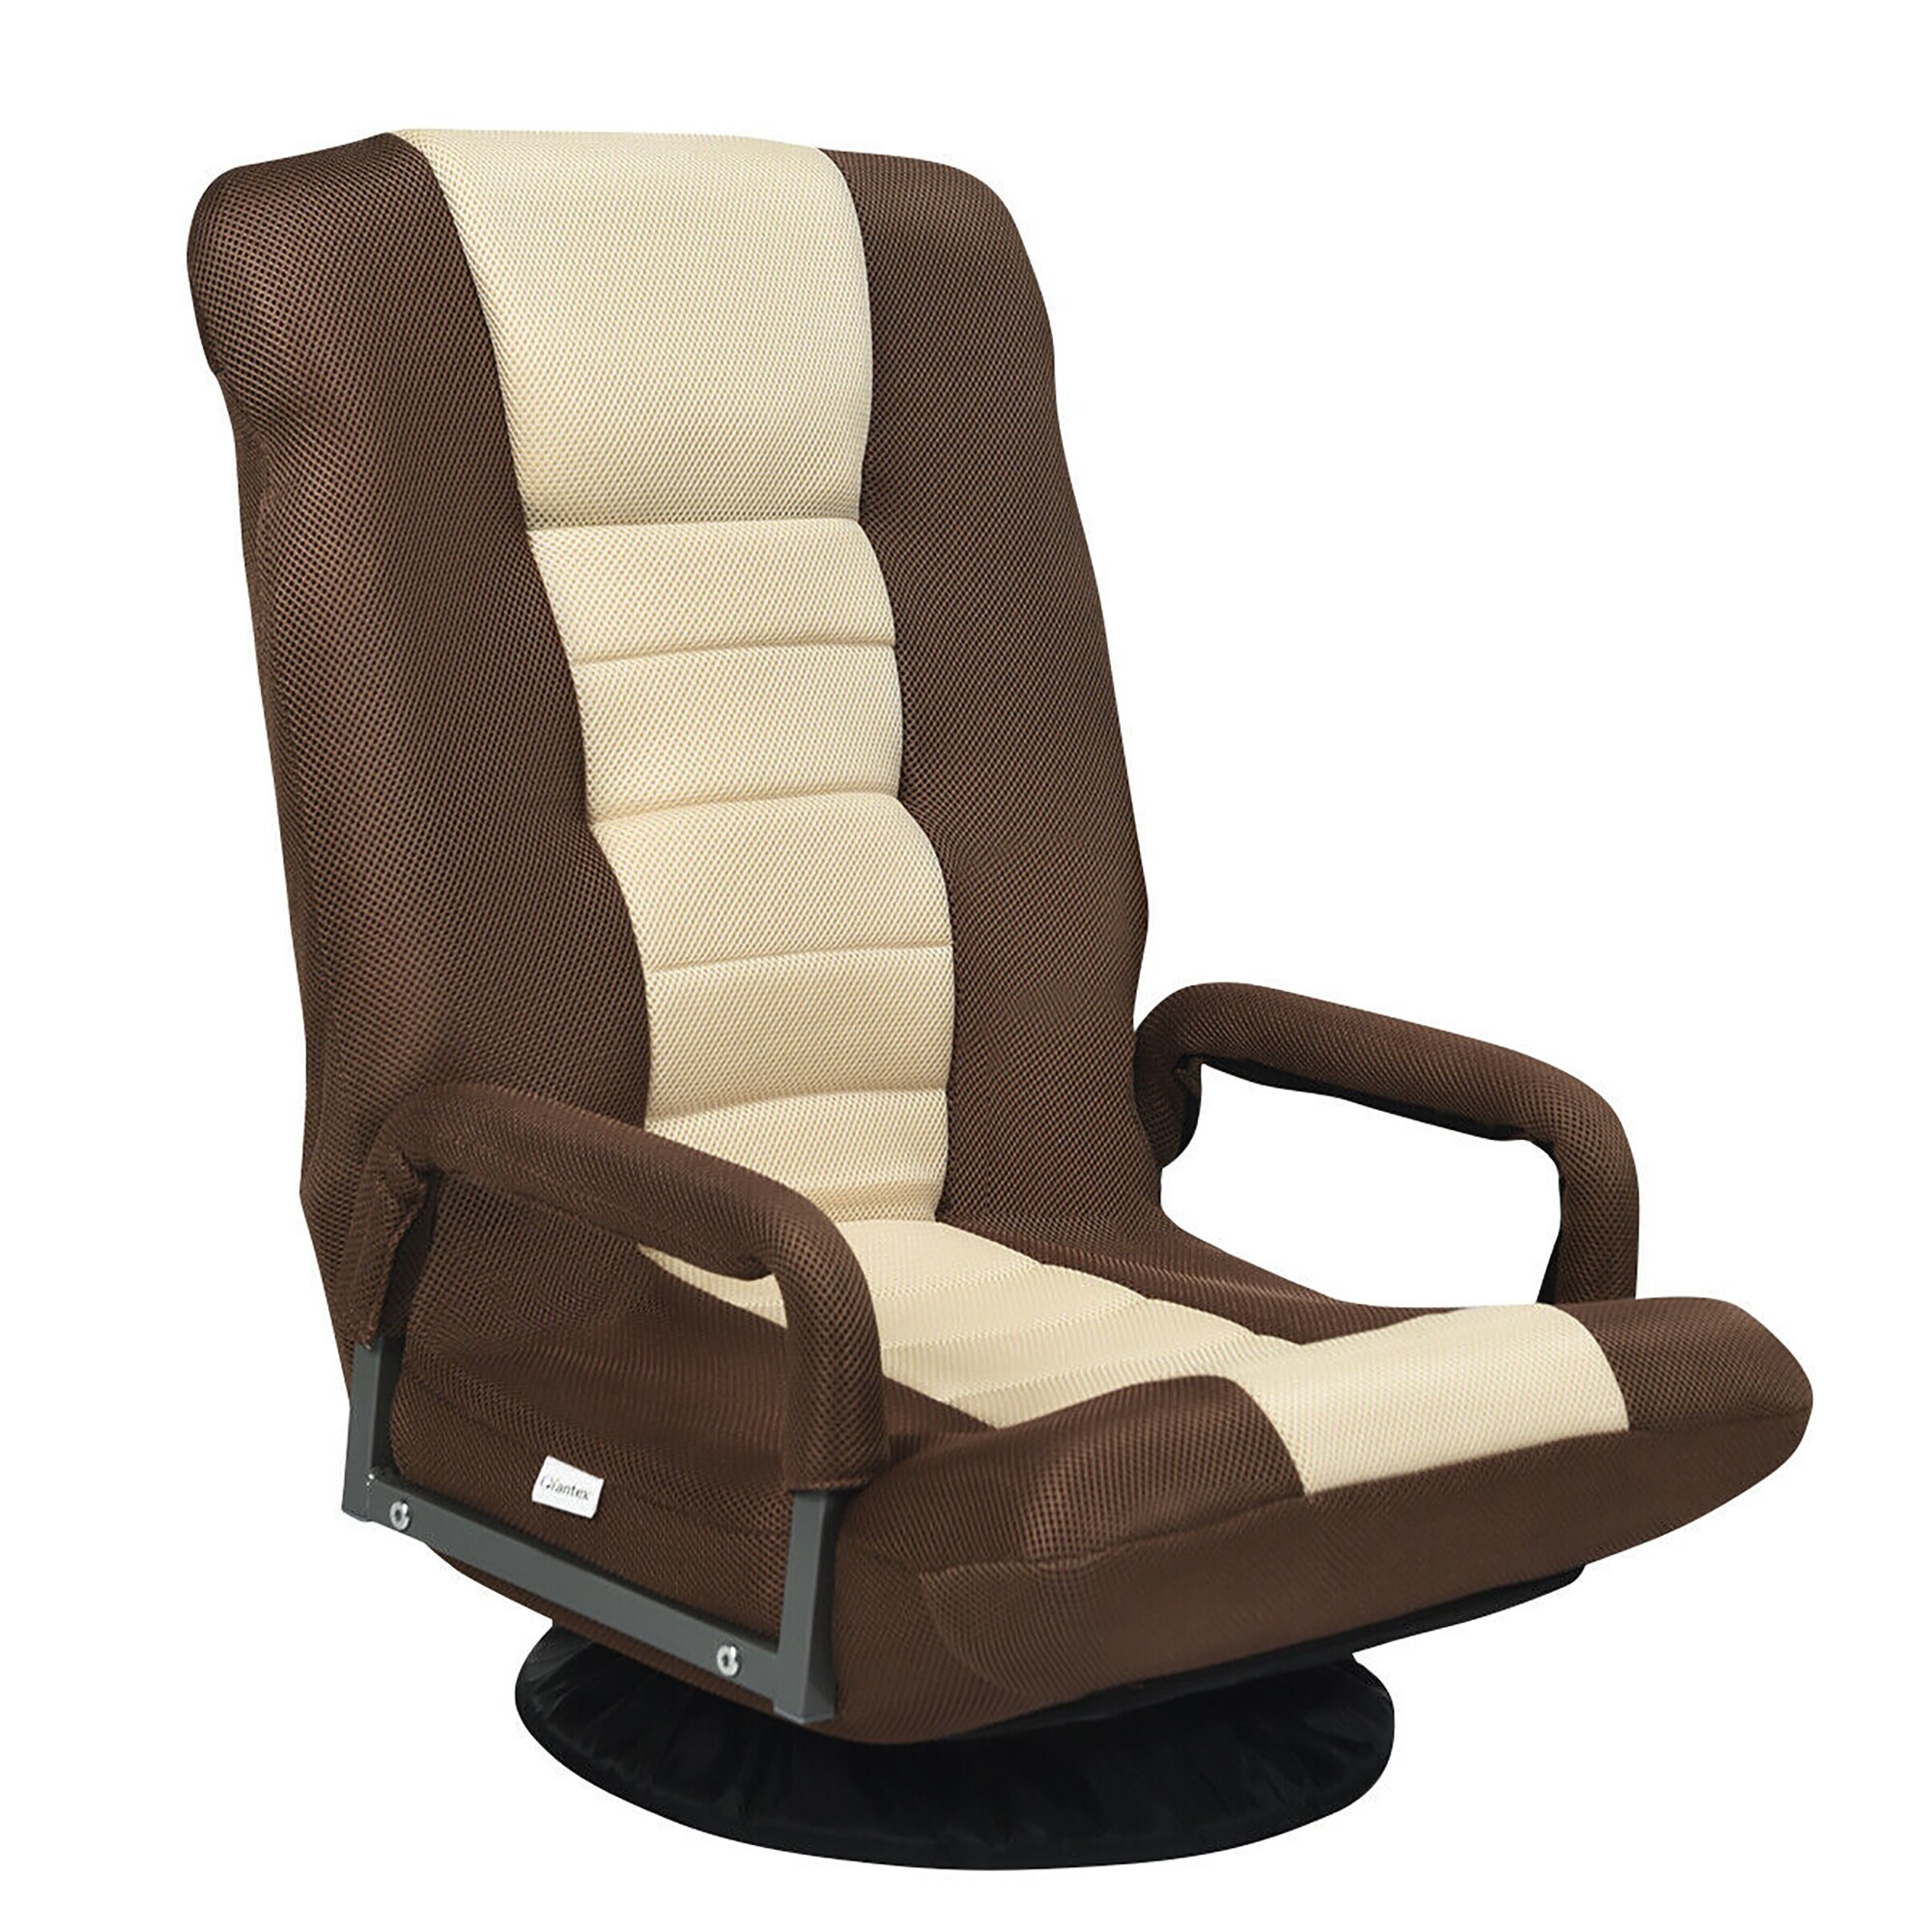 https://ak1.ostkcdn.com/images/products/is/images/direct/7195c640bee141da6ac269f34a2867c4819f3996/360-Degree-Swivel-Gaming-Floor-Chair-with-Foldable-Adjustable-Backrest.jpg